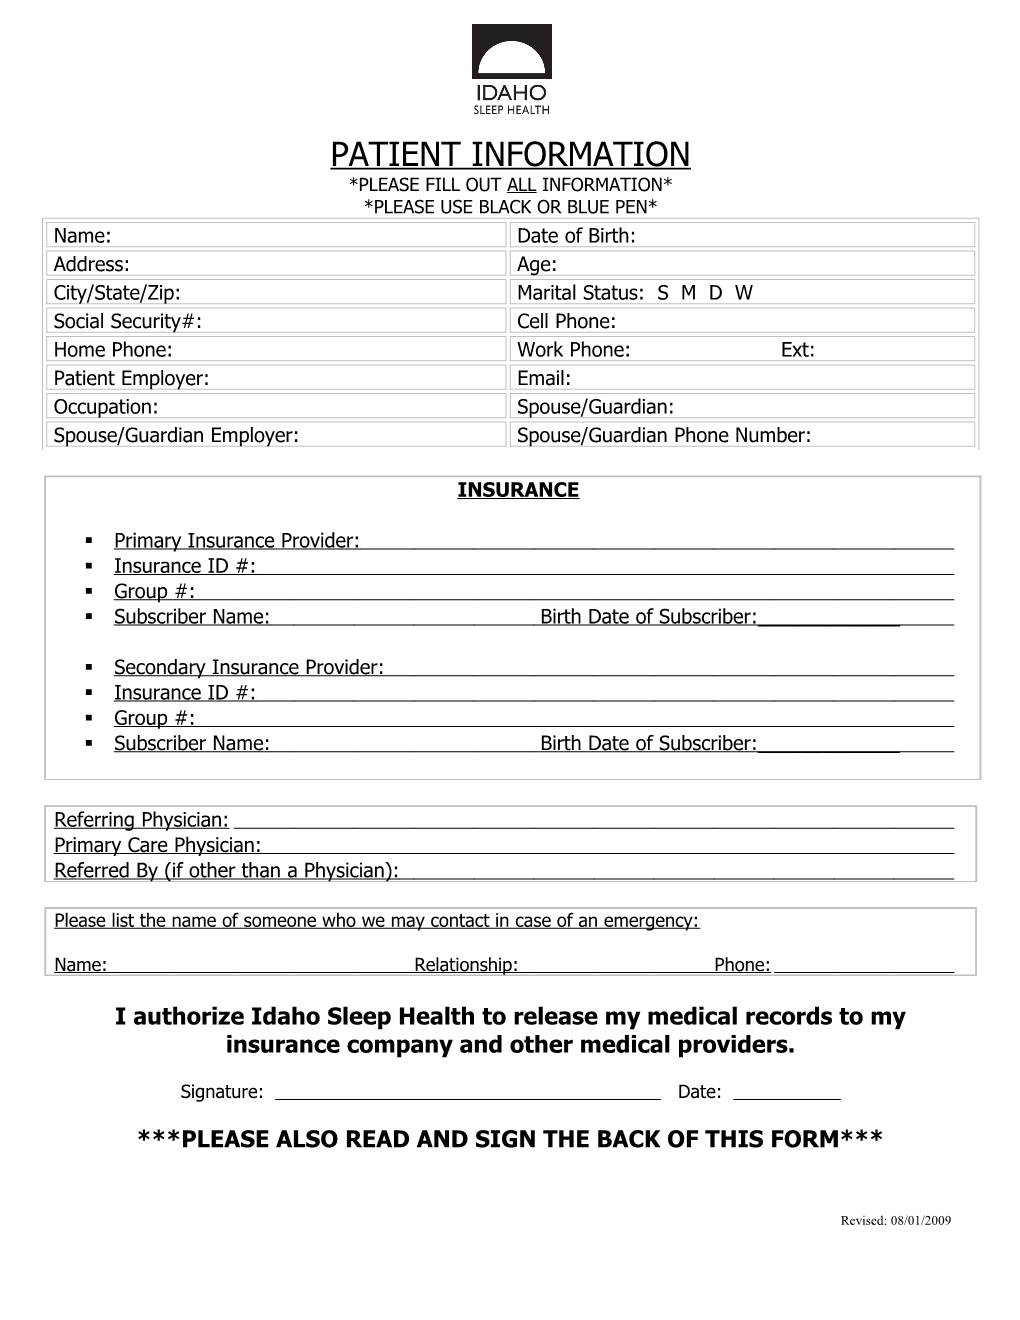 *Please Fill out All Information*